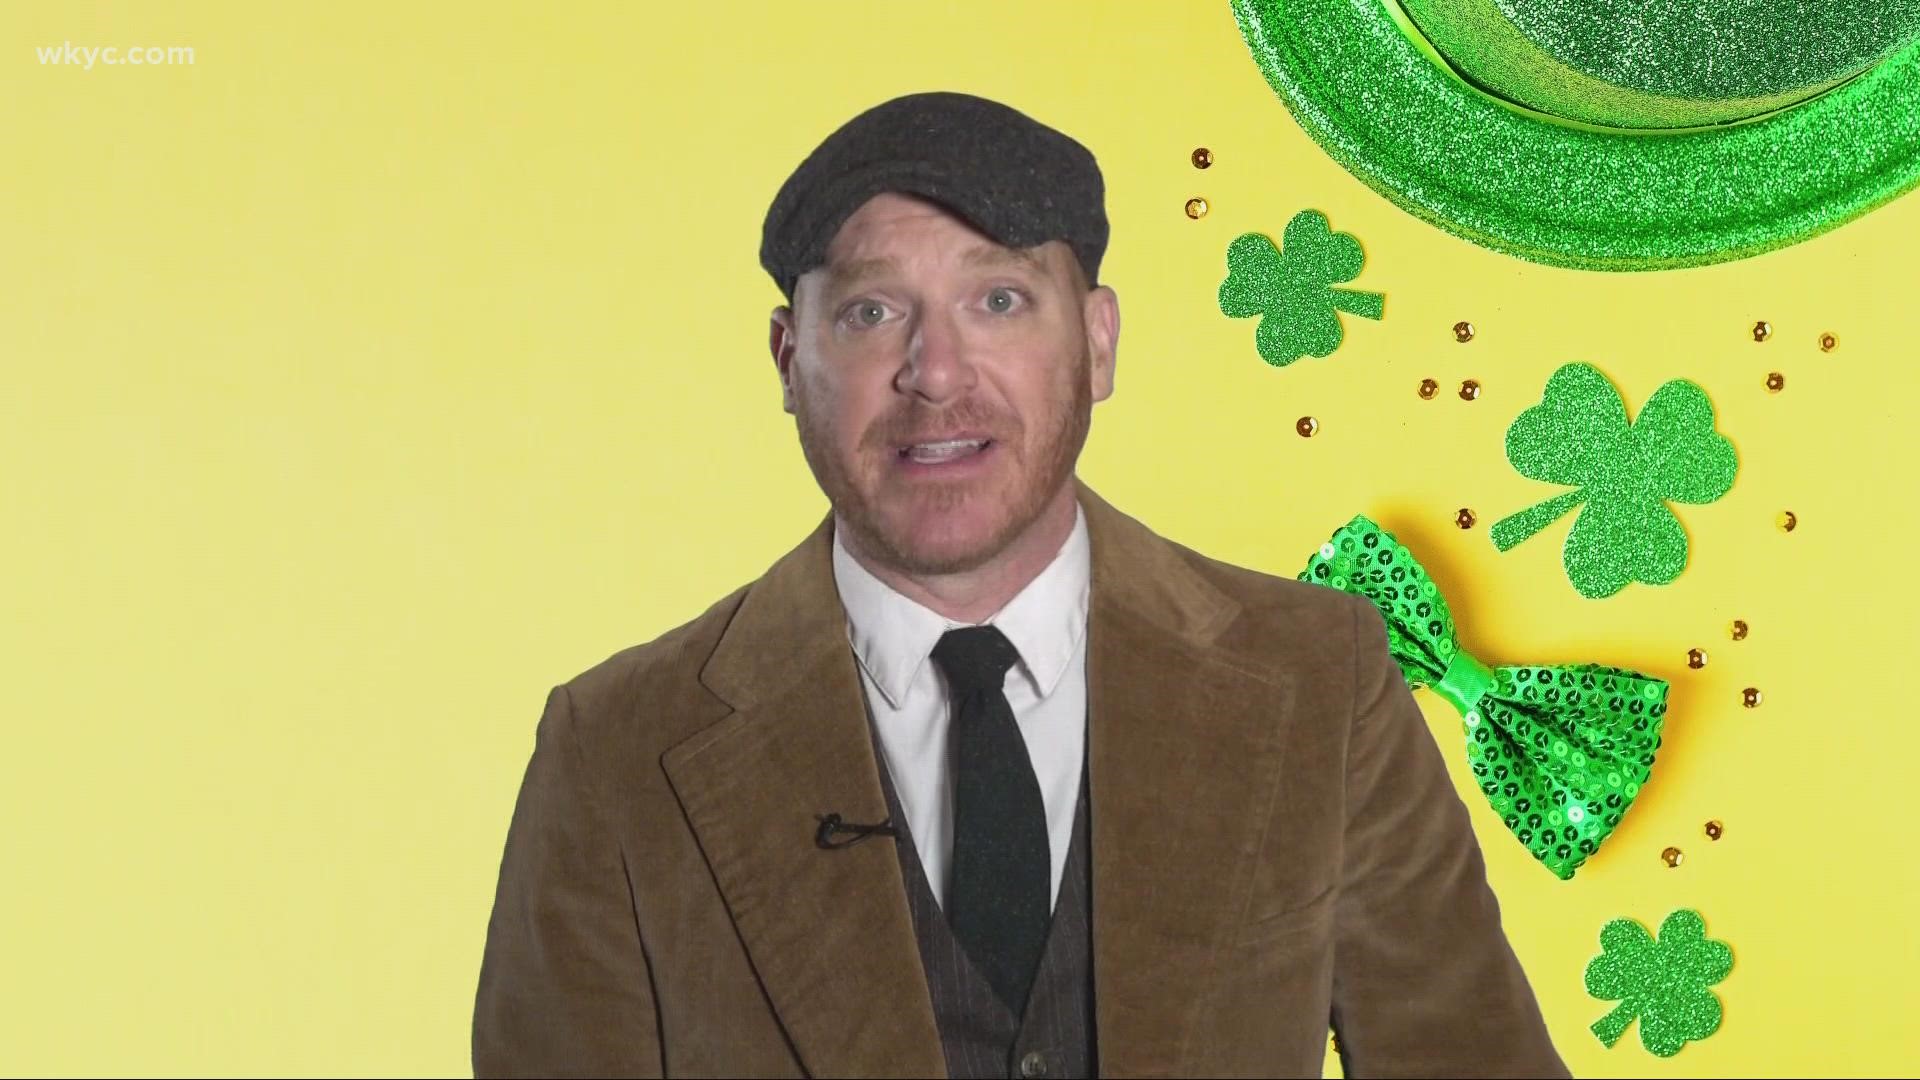 In honor of St. Paddy's Day, our resident red head Mike Polk decided to learn the native language.